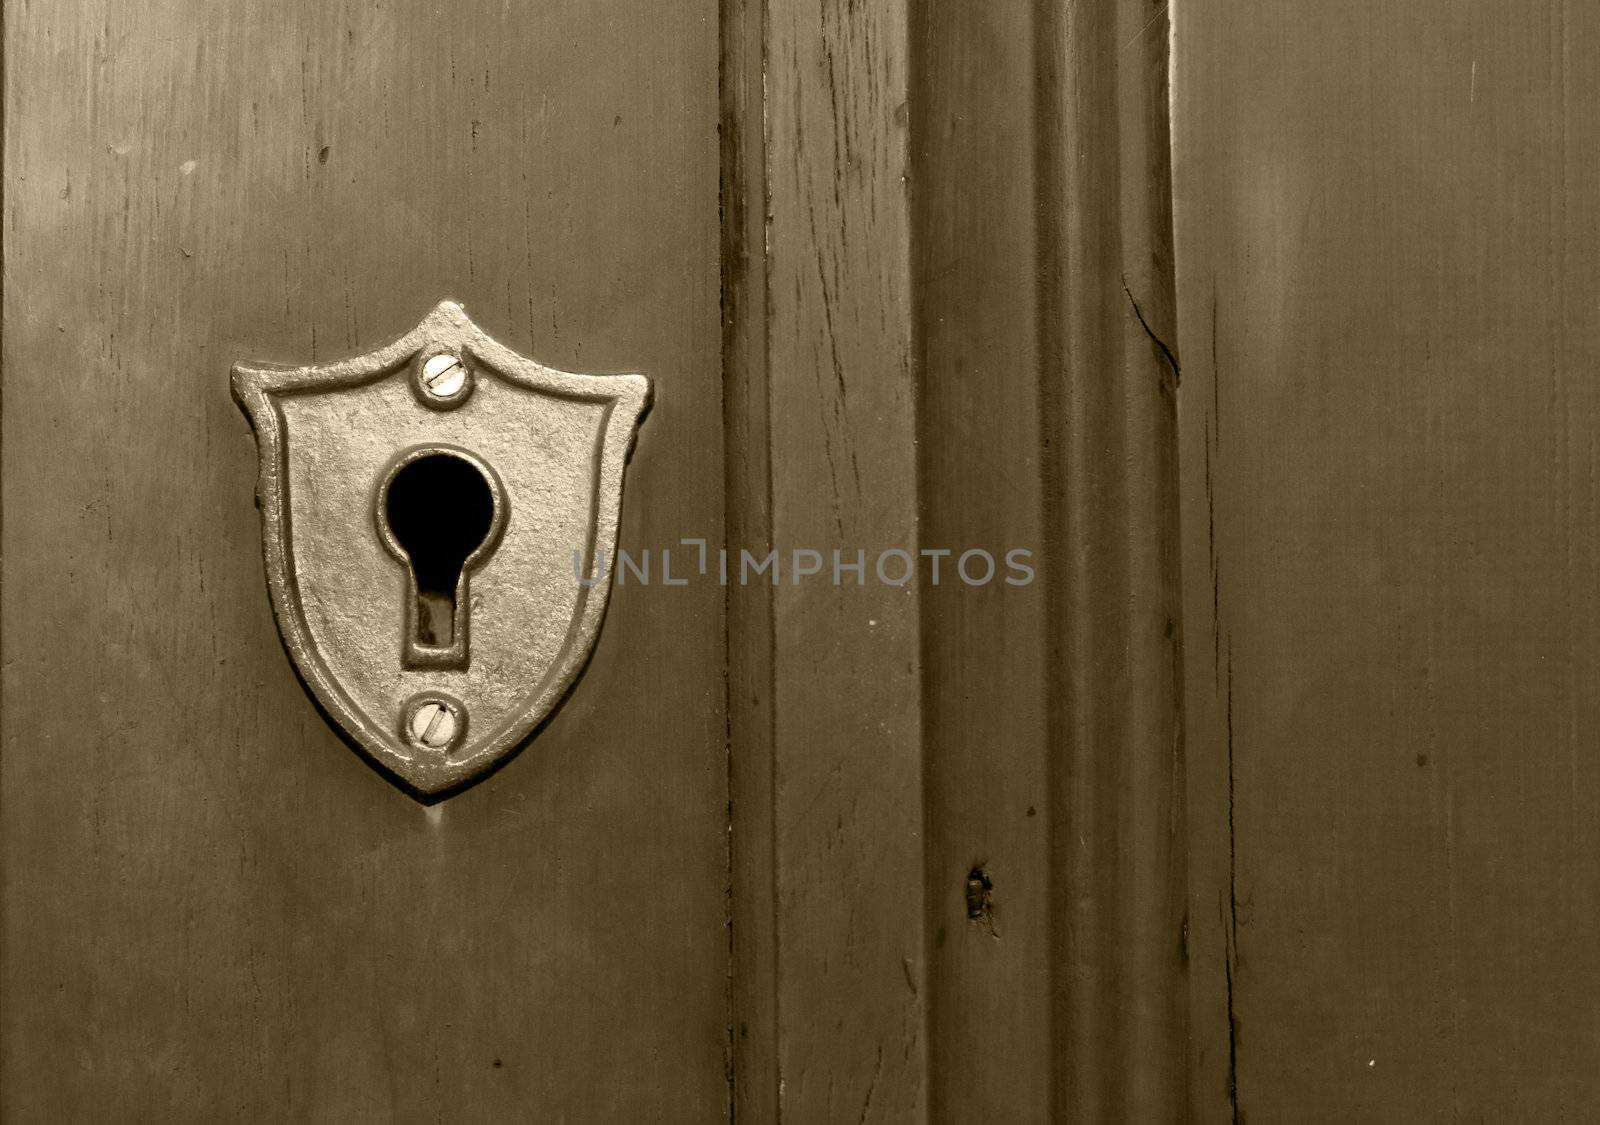 An old fashioned key hole built into a wooden door